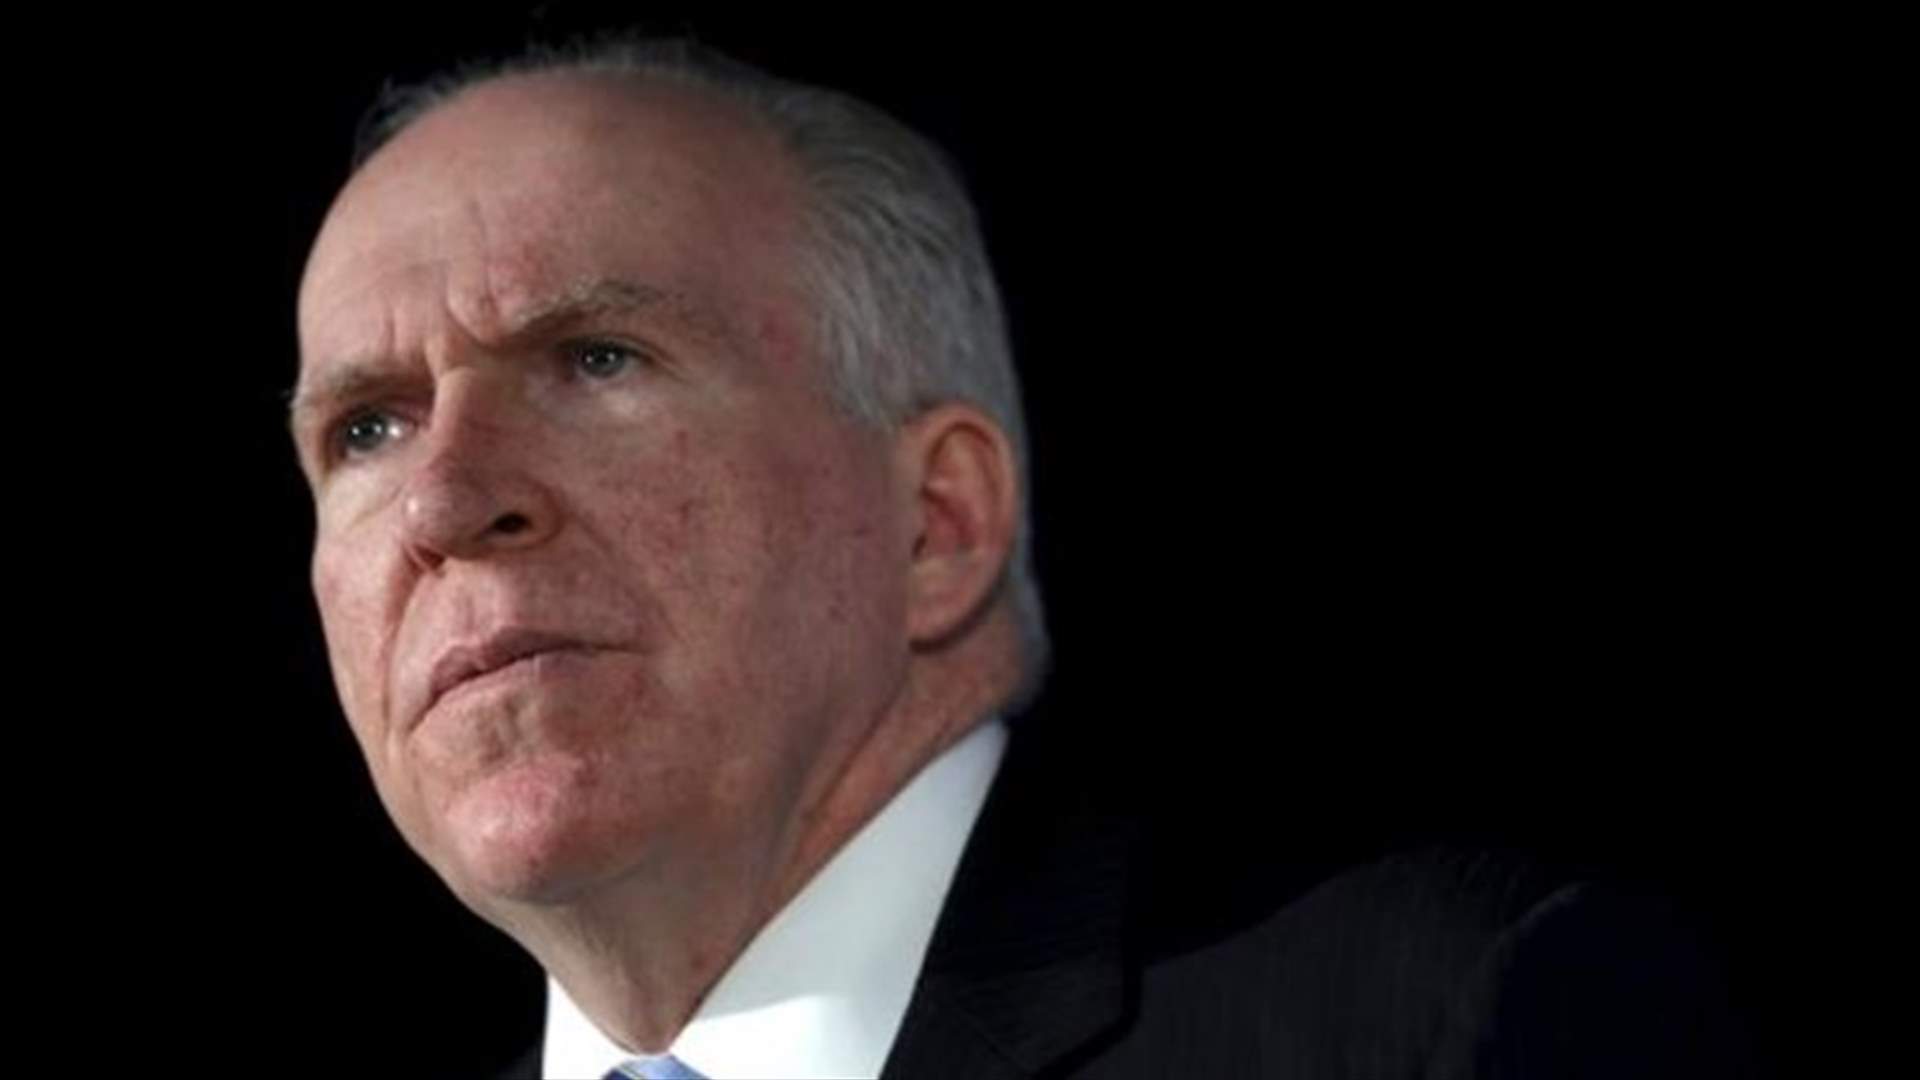 CIA chief expects release of 9/11 documents to clear Saudi Arabia